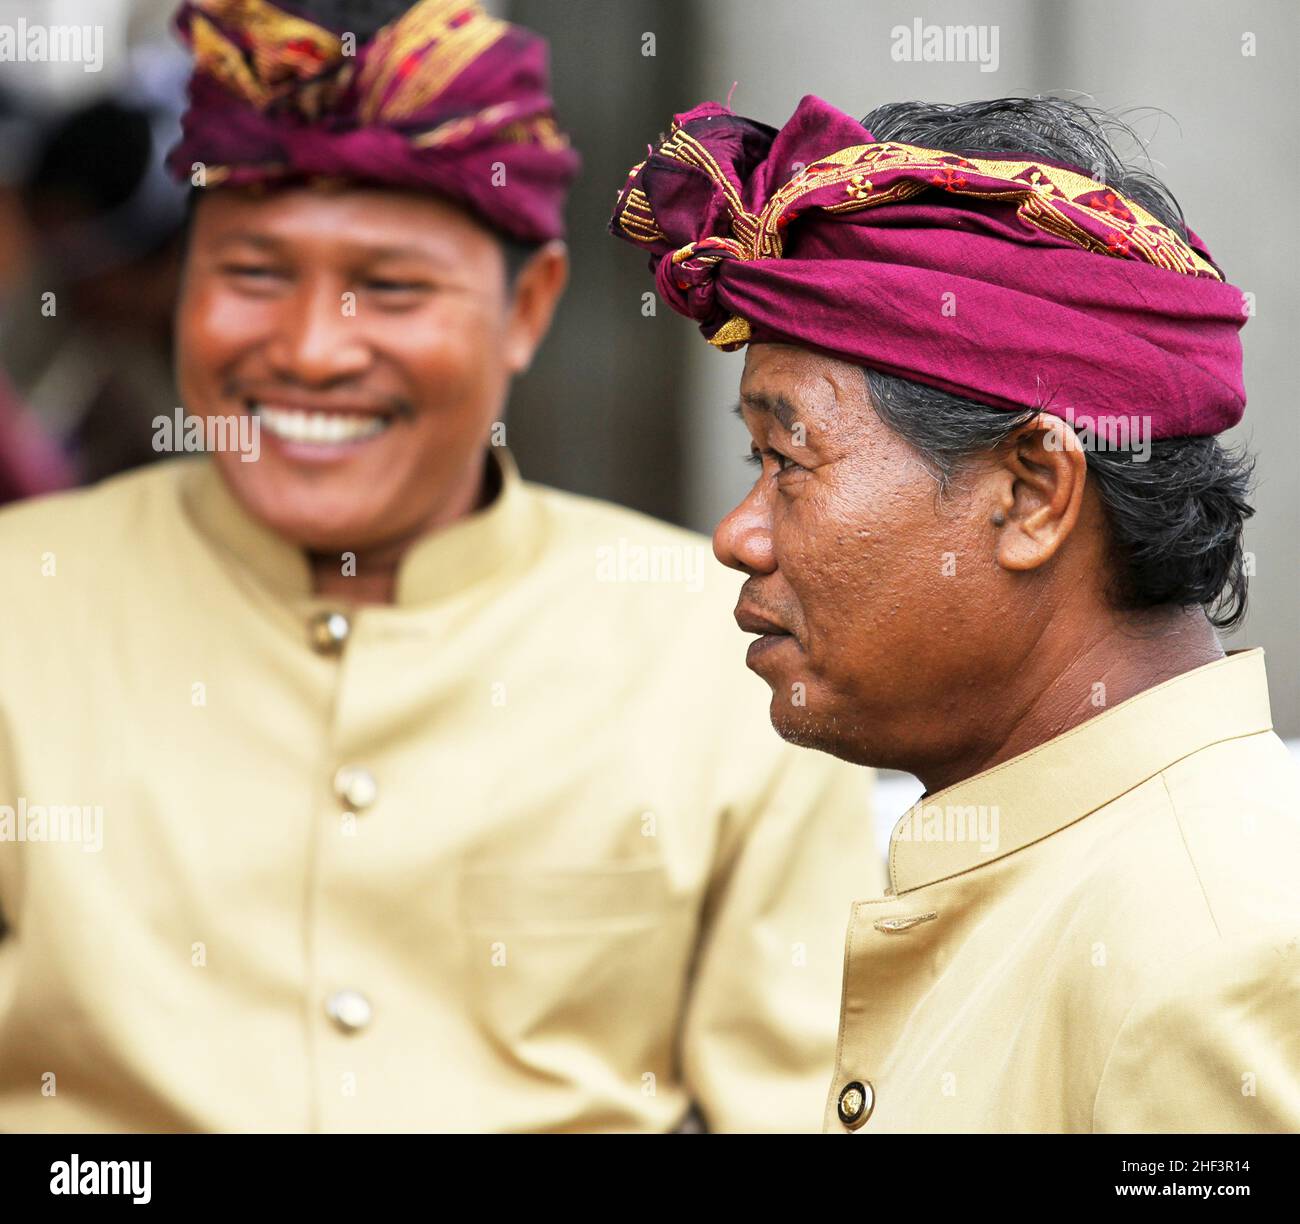 Two Balinese men wearing udeng headwear at a ceremony taking place in the village of Ketewel in Gianyar, Bali, Indonesia Stock Photo